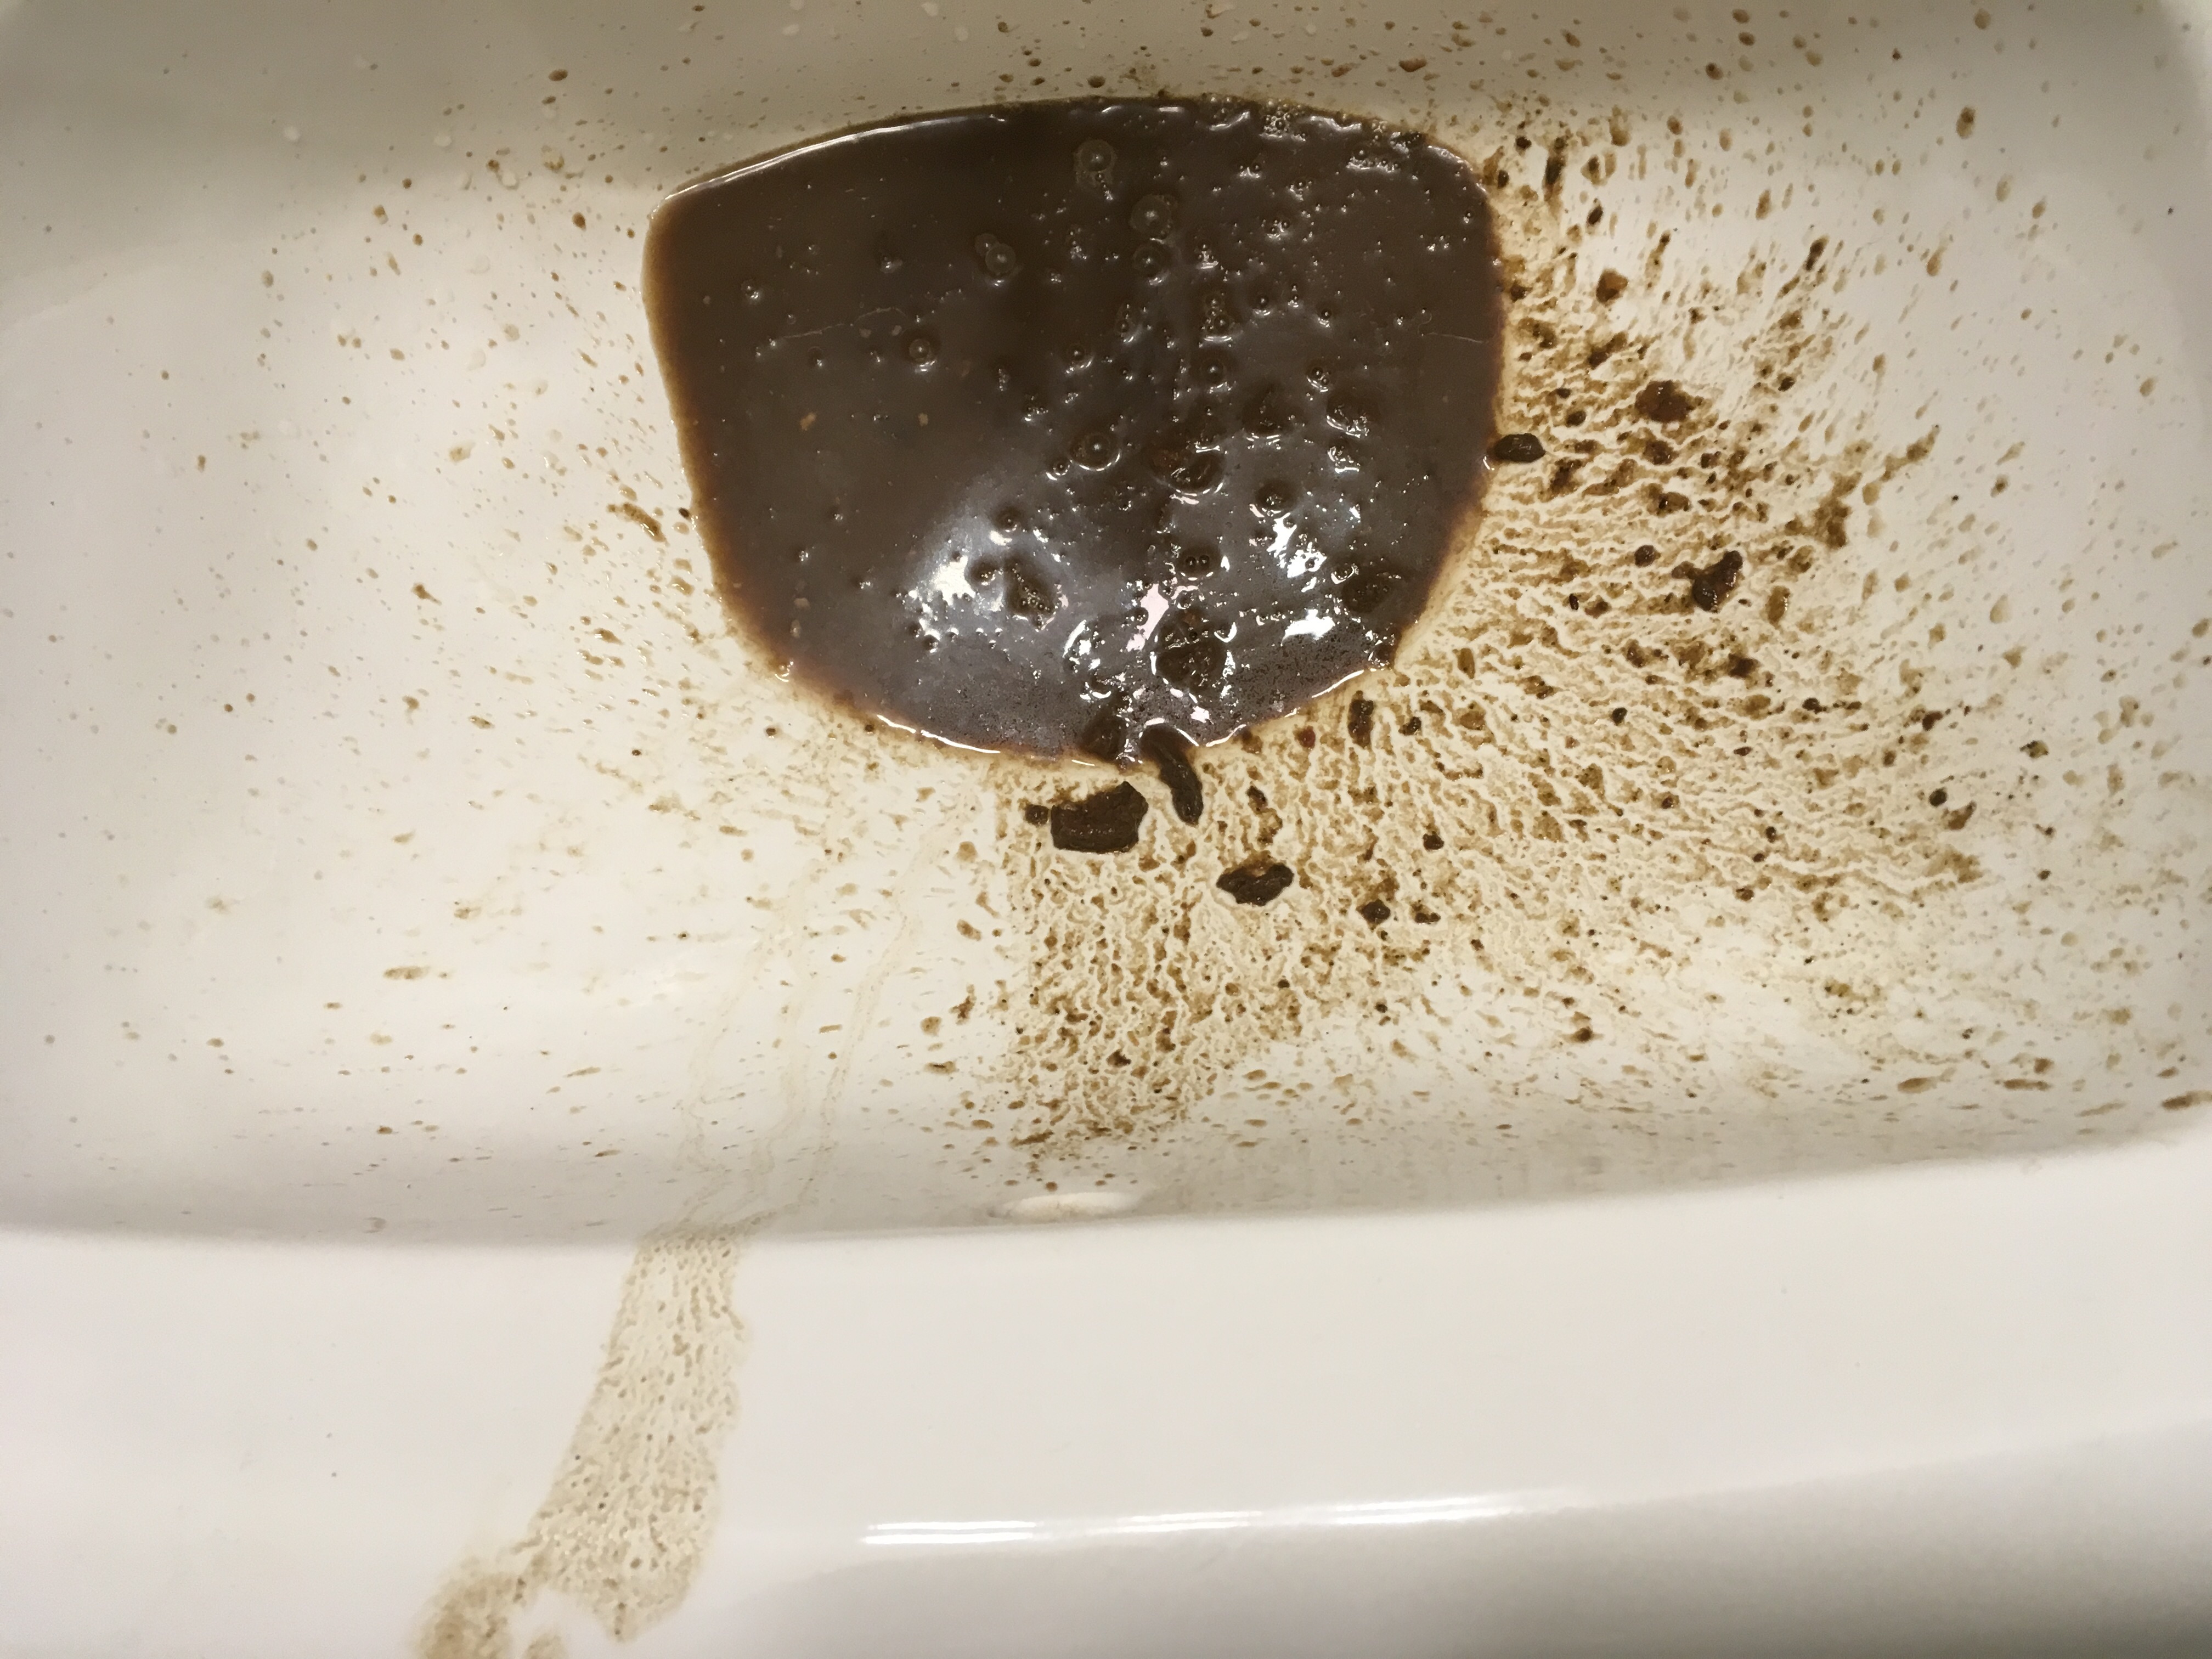 I just shitty all over in the. Sink